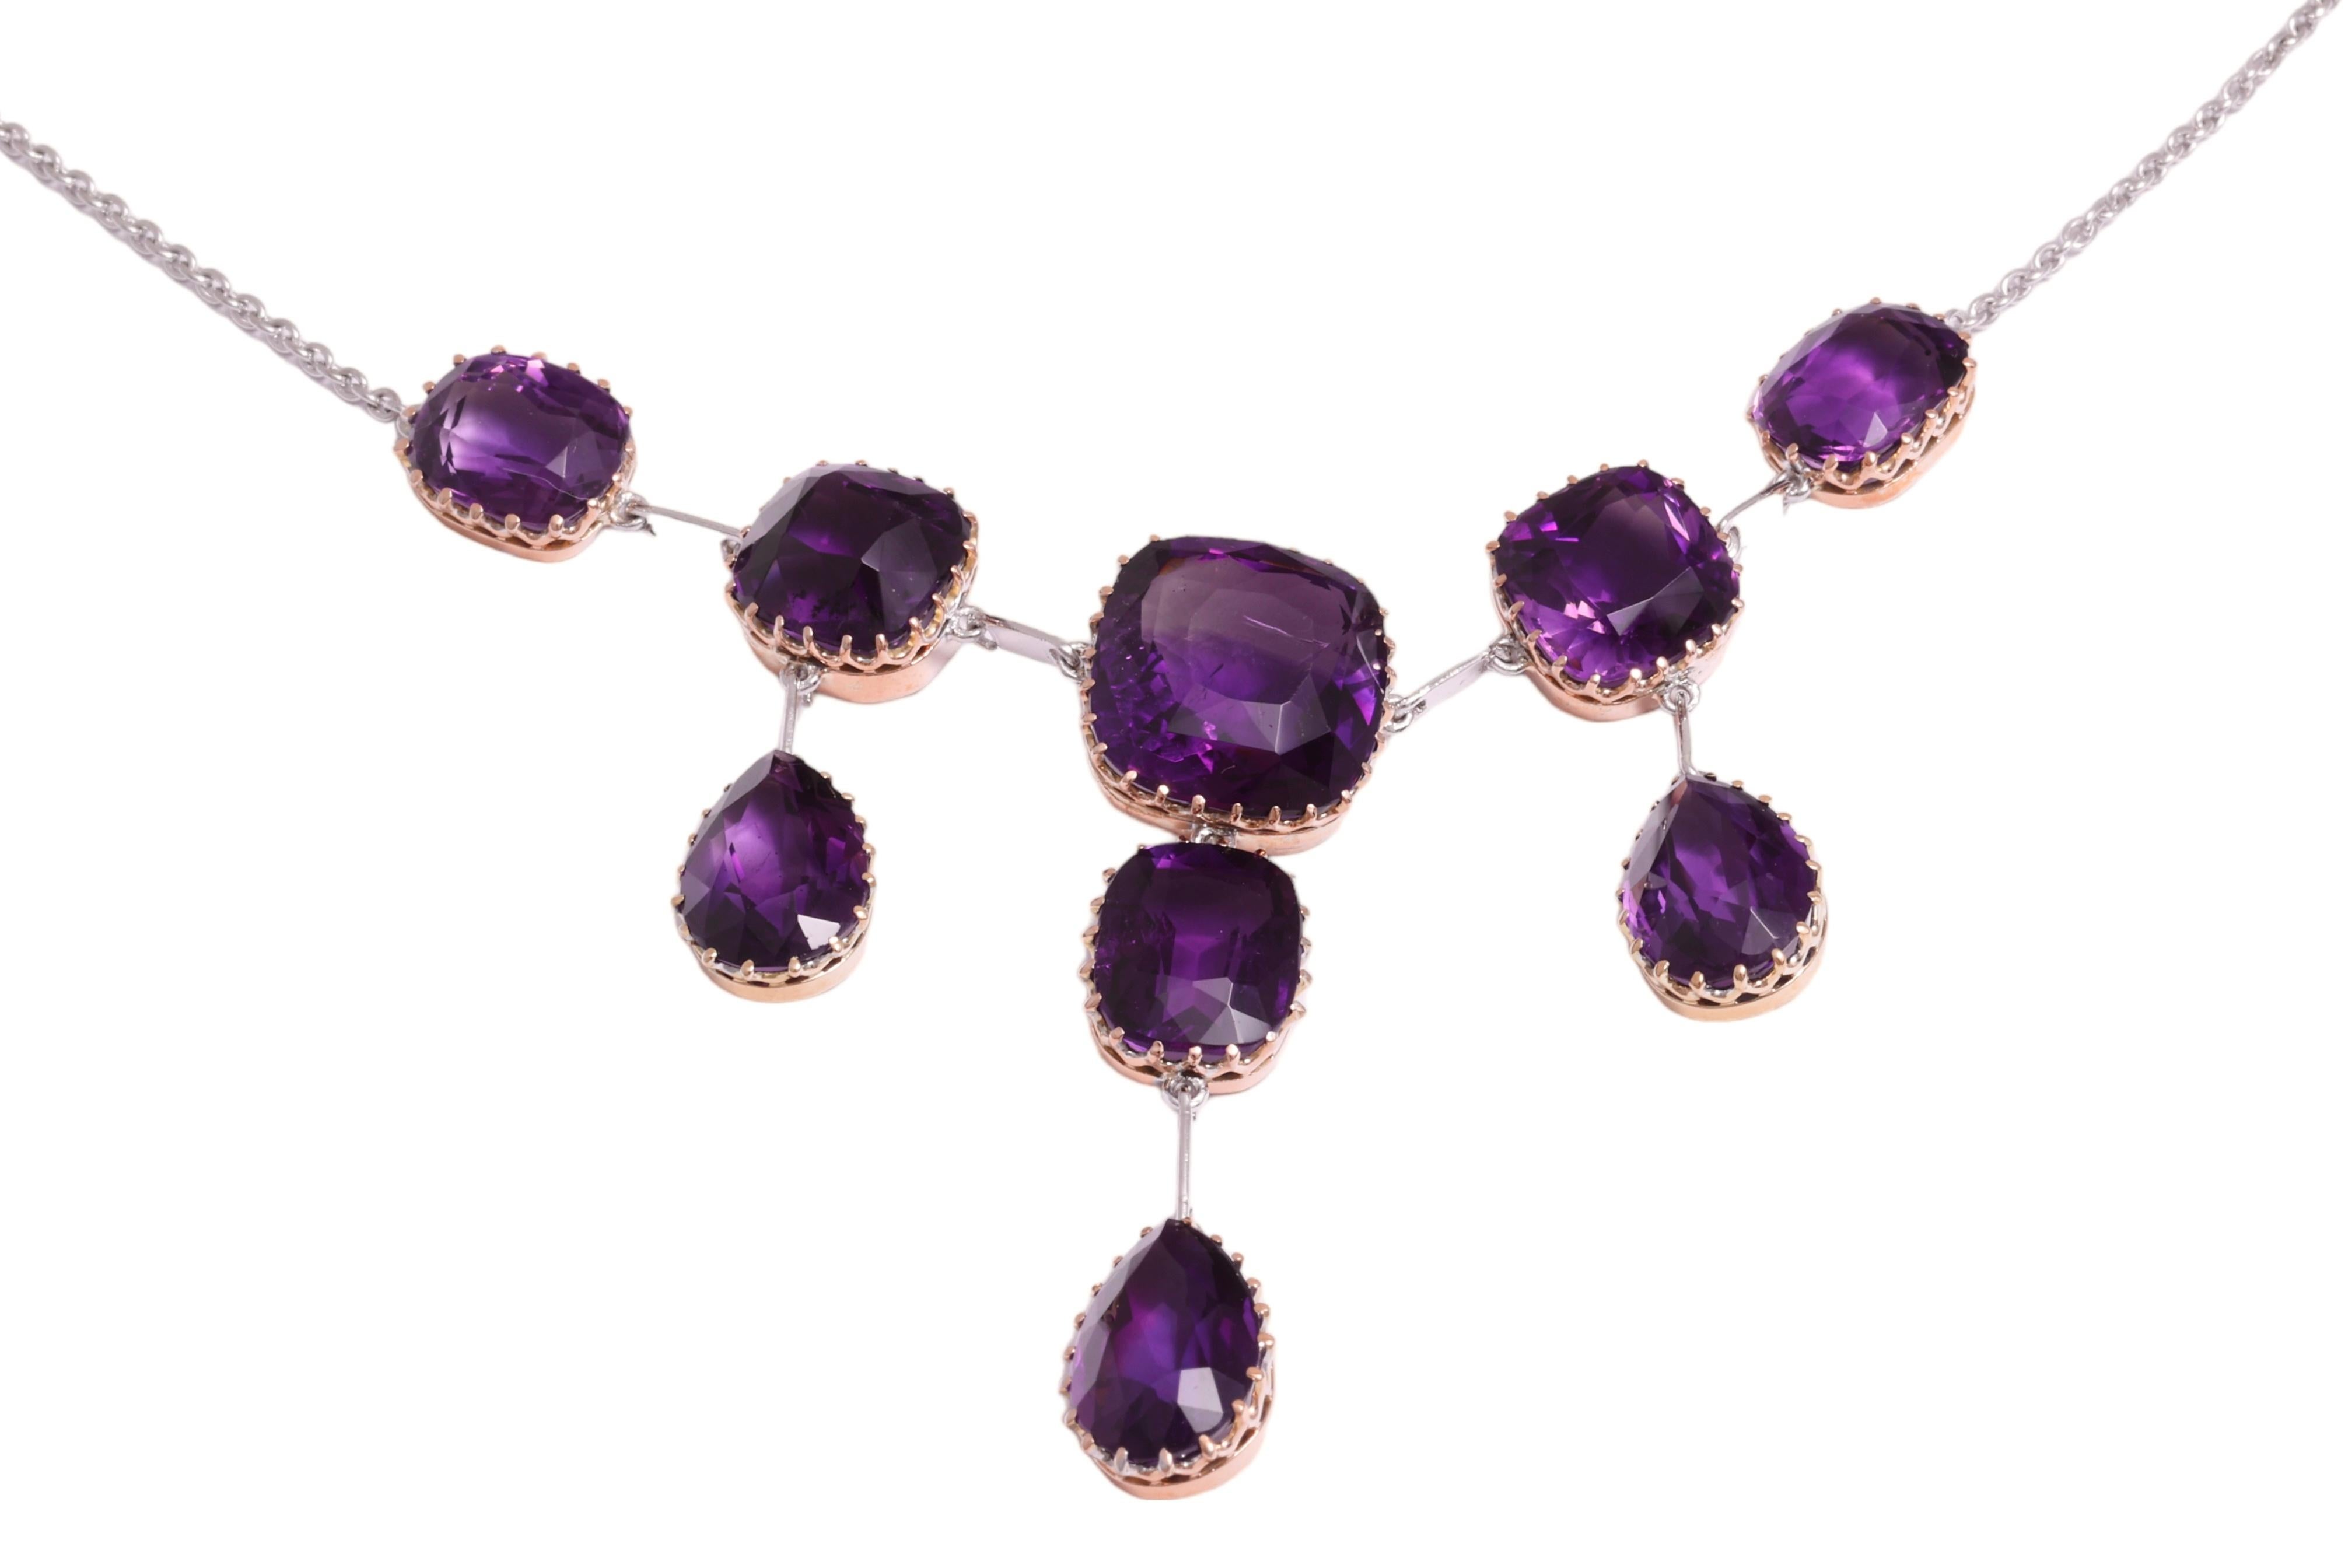 Gorgeous Platinum / Gold Chandelier Drop Necklace With 55 ct. Amethyst Gemstones For Sale 2